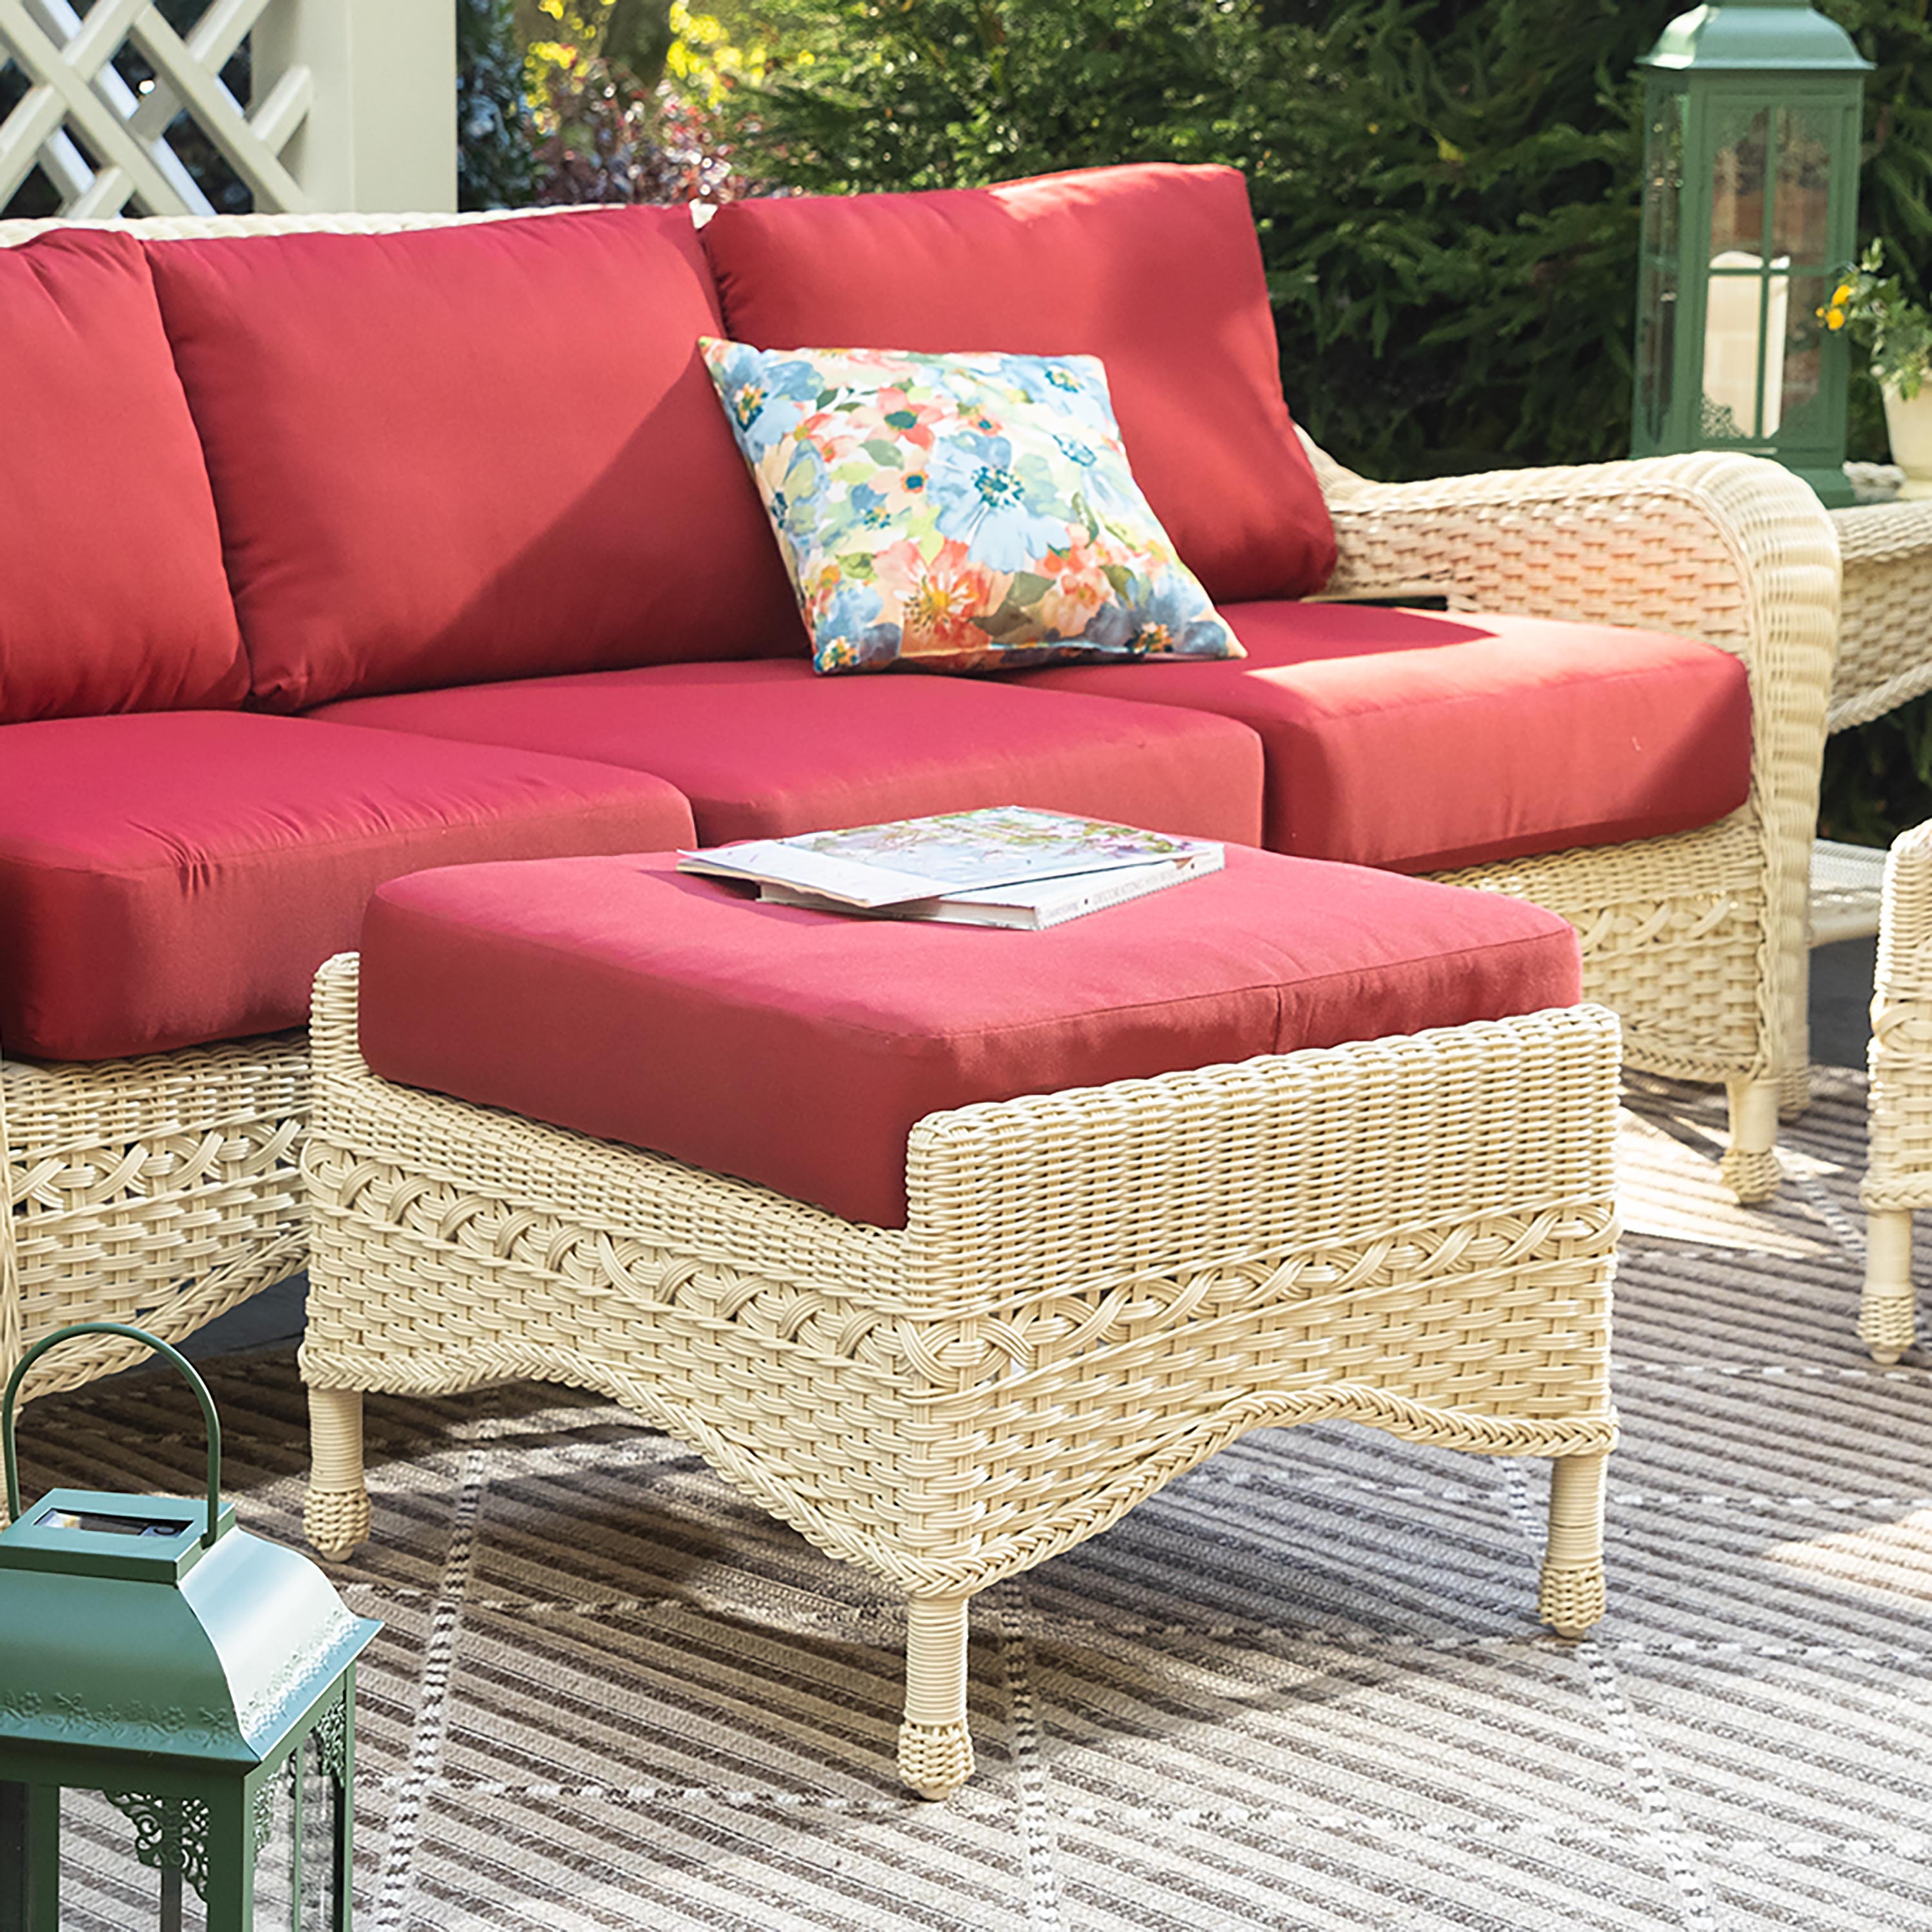 Prospect Hill Outdoor Wicker Deep Seating Ottoman with Cushion